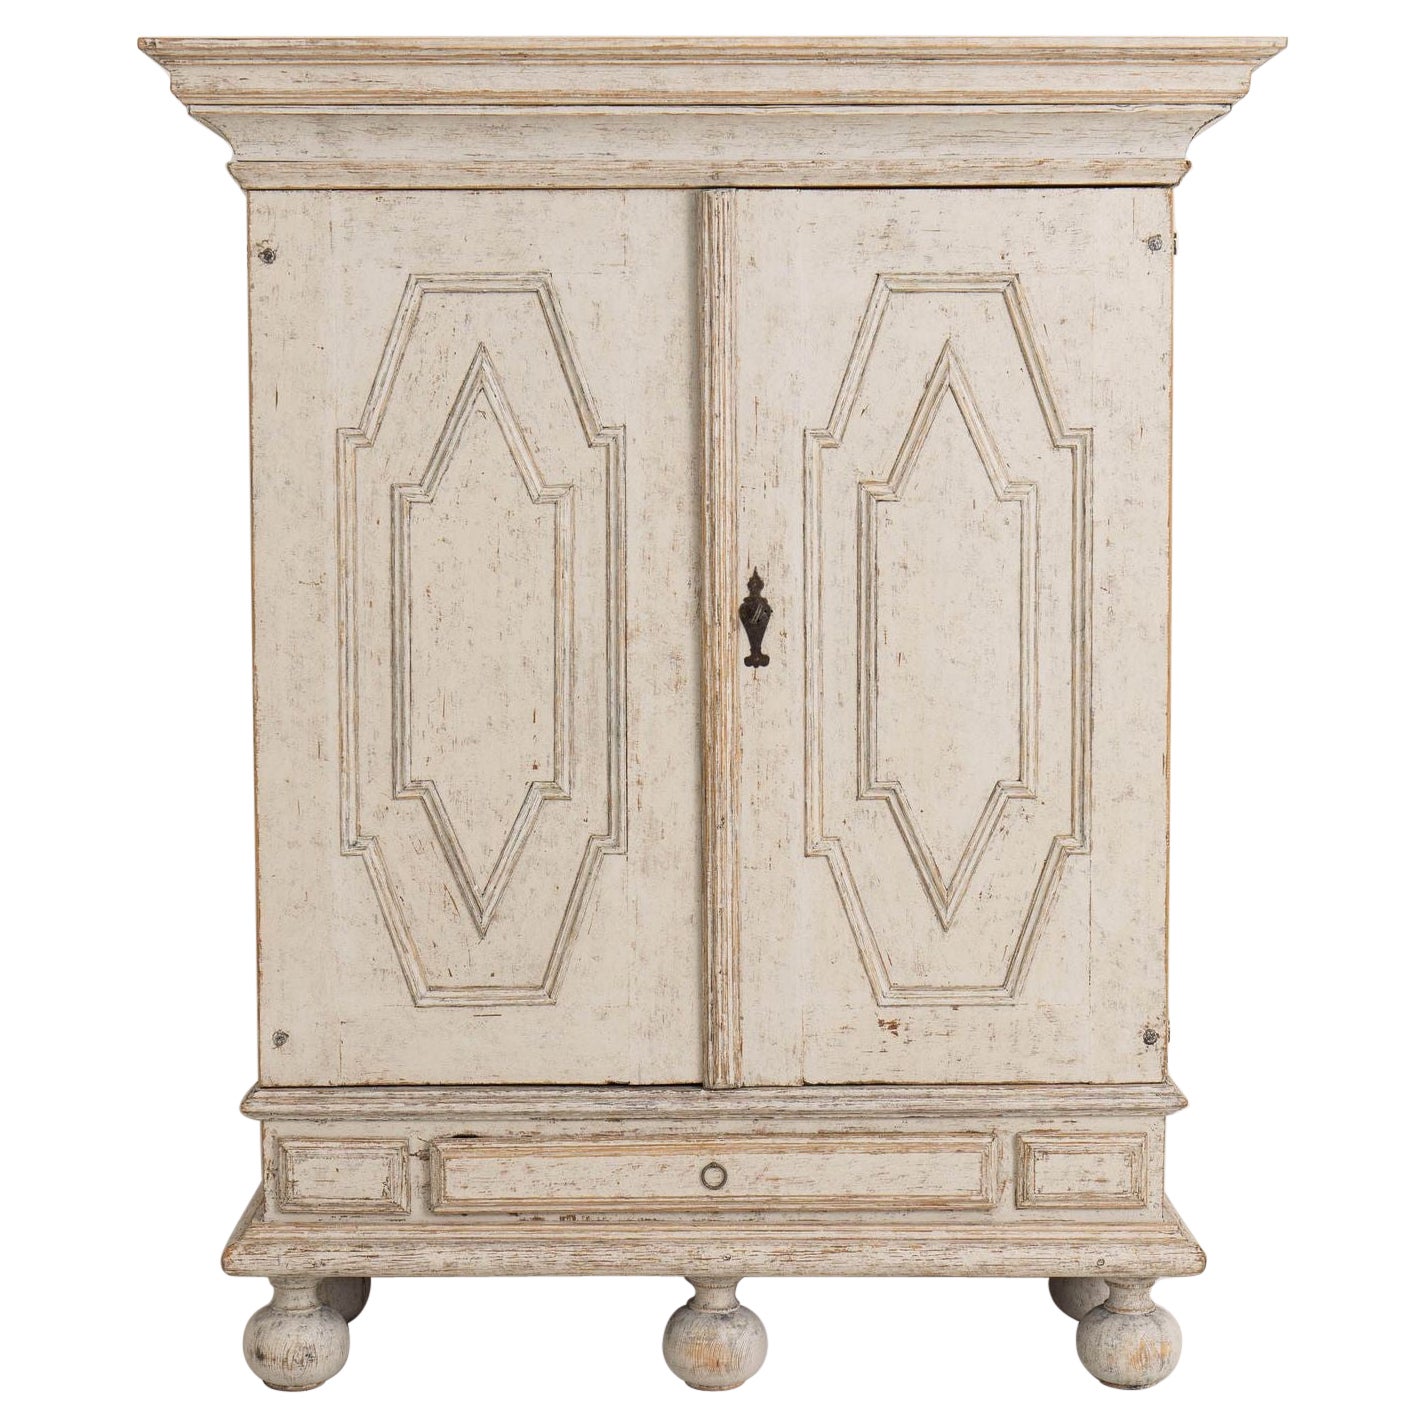 18th c. Swedish Baroque Period Painted Cabinet